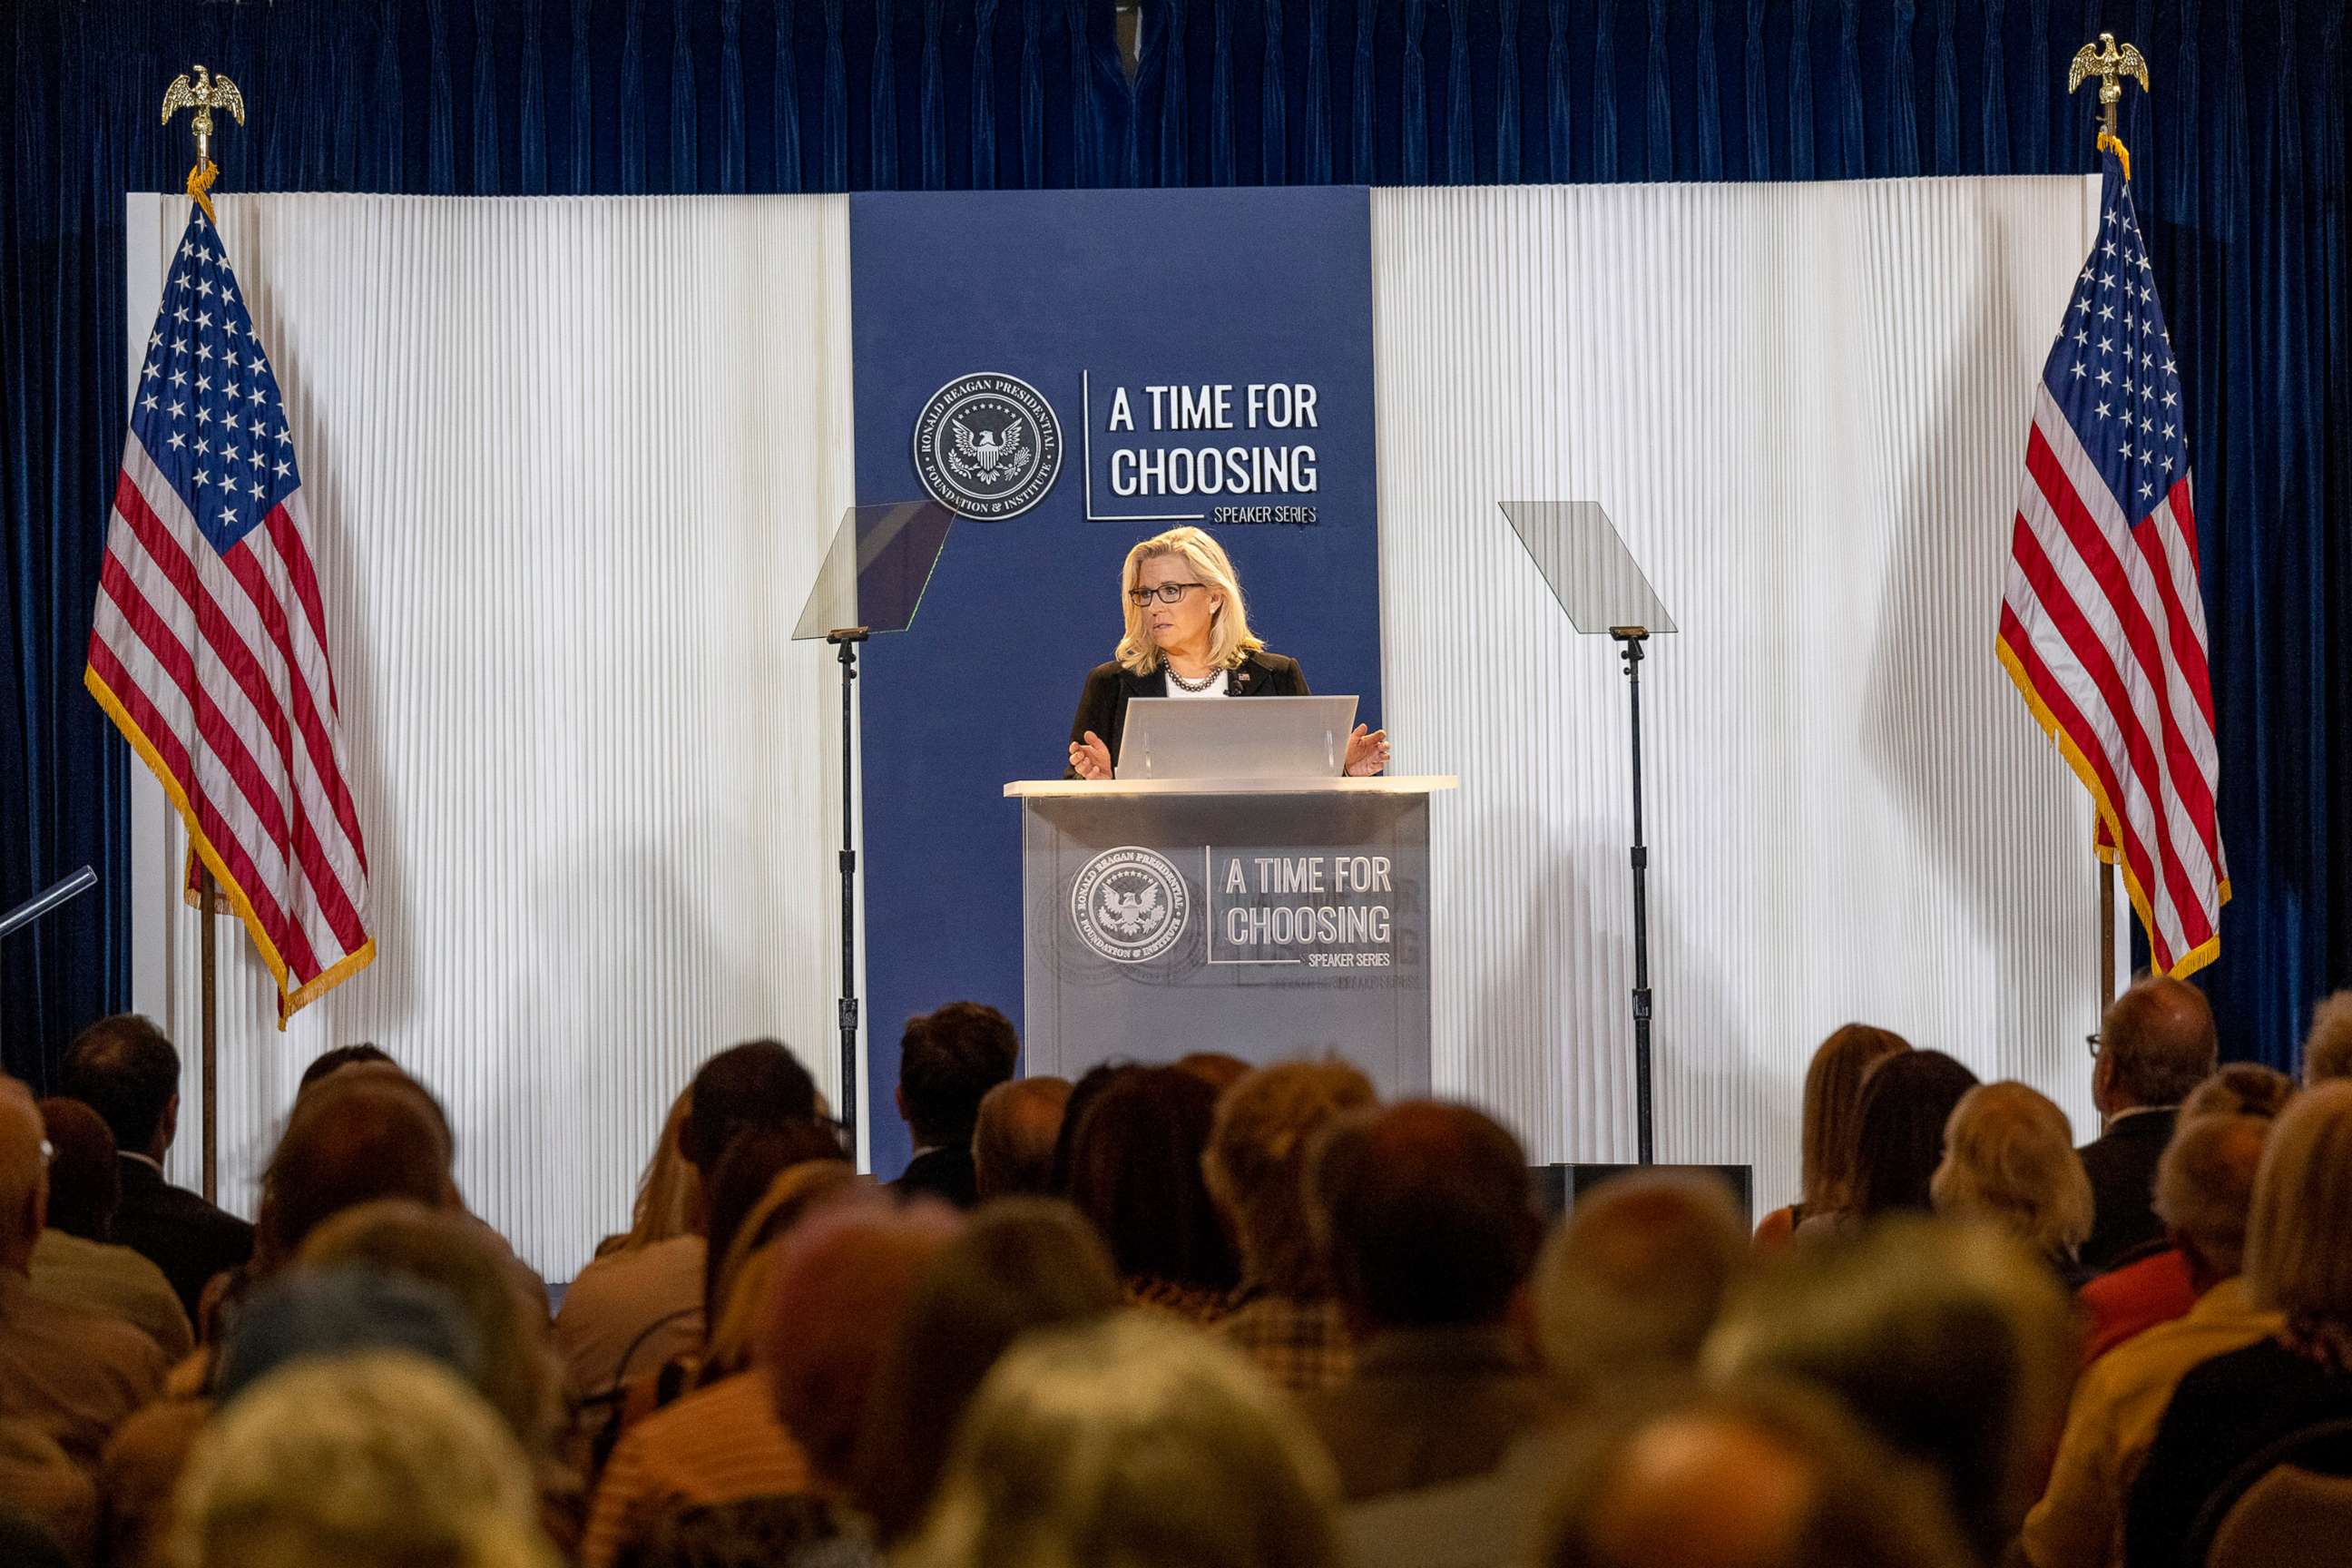 PHOTO: Congresswoman Liz Cheney speaks at the Ronald Reagan Presidential Library in Simi Valley, Calif., June 29, 2022.